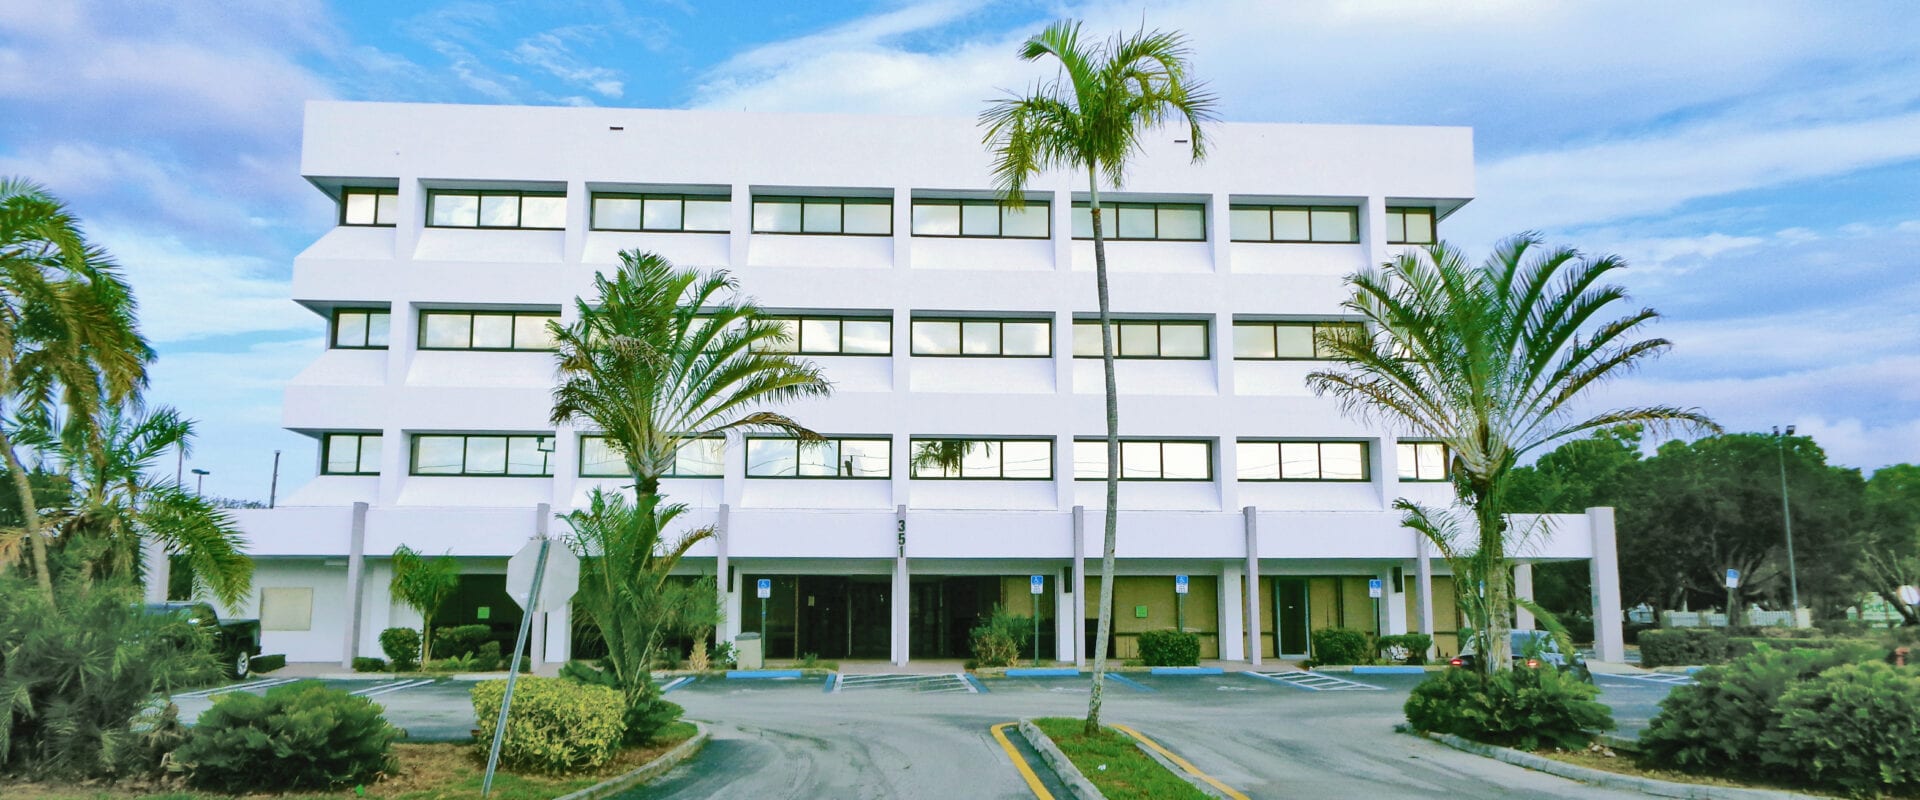 For Lease Bank Site/Office Space Pompano Beach